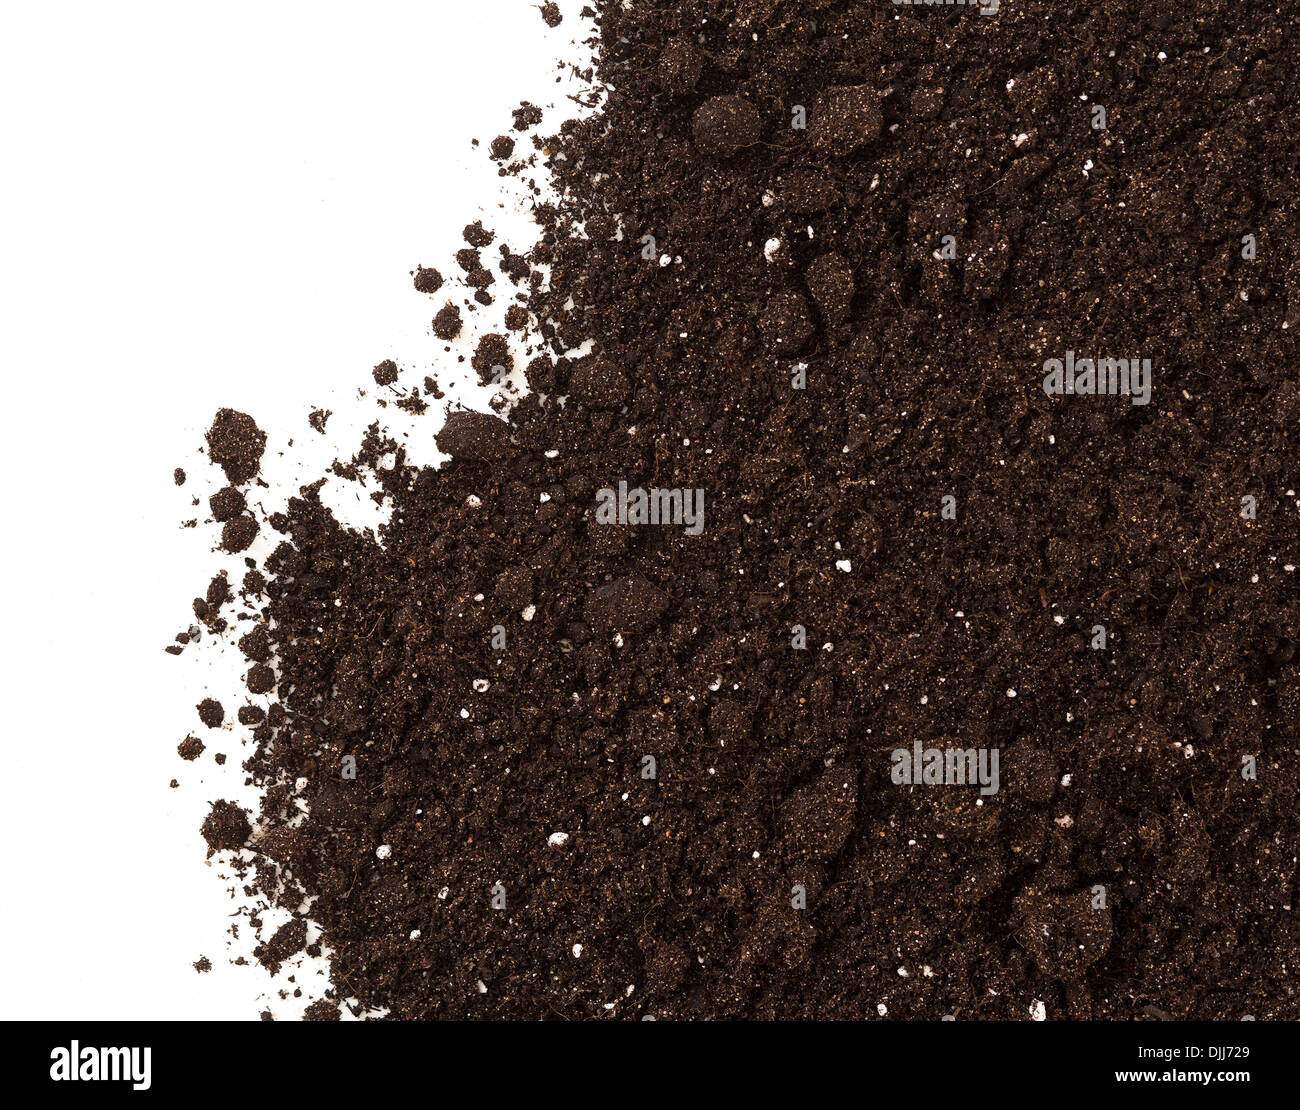 Soil or dirt crop isolated on white background Stock Photo